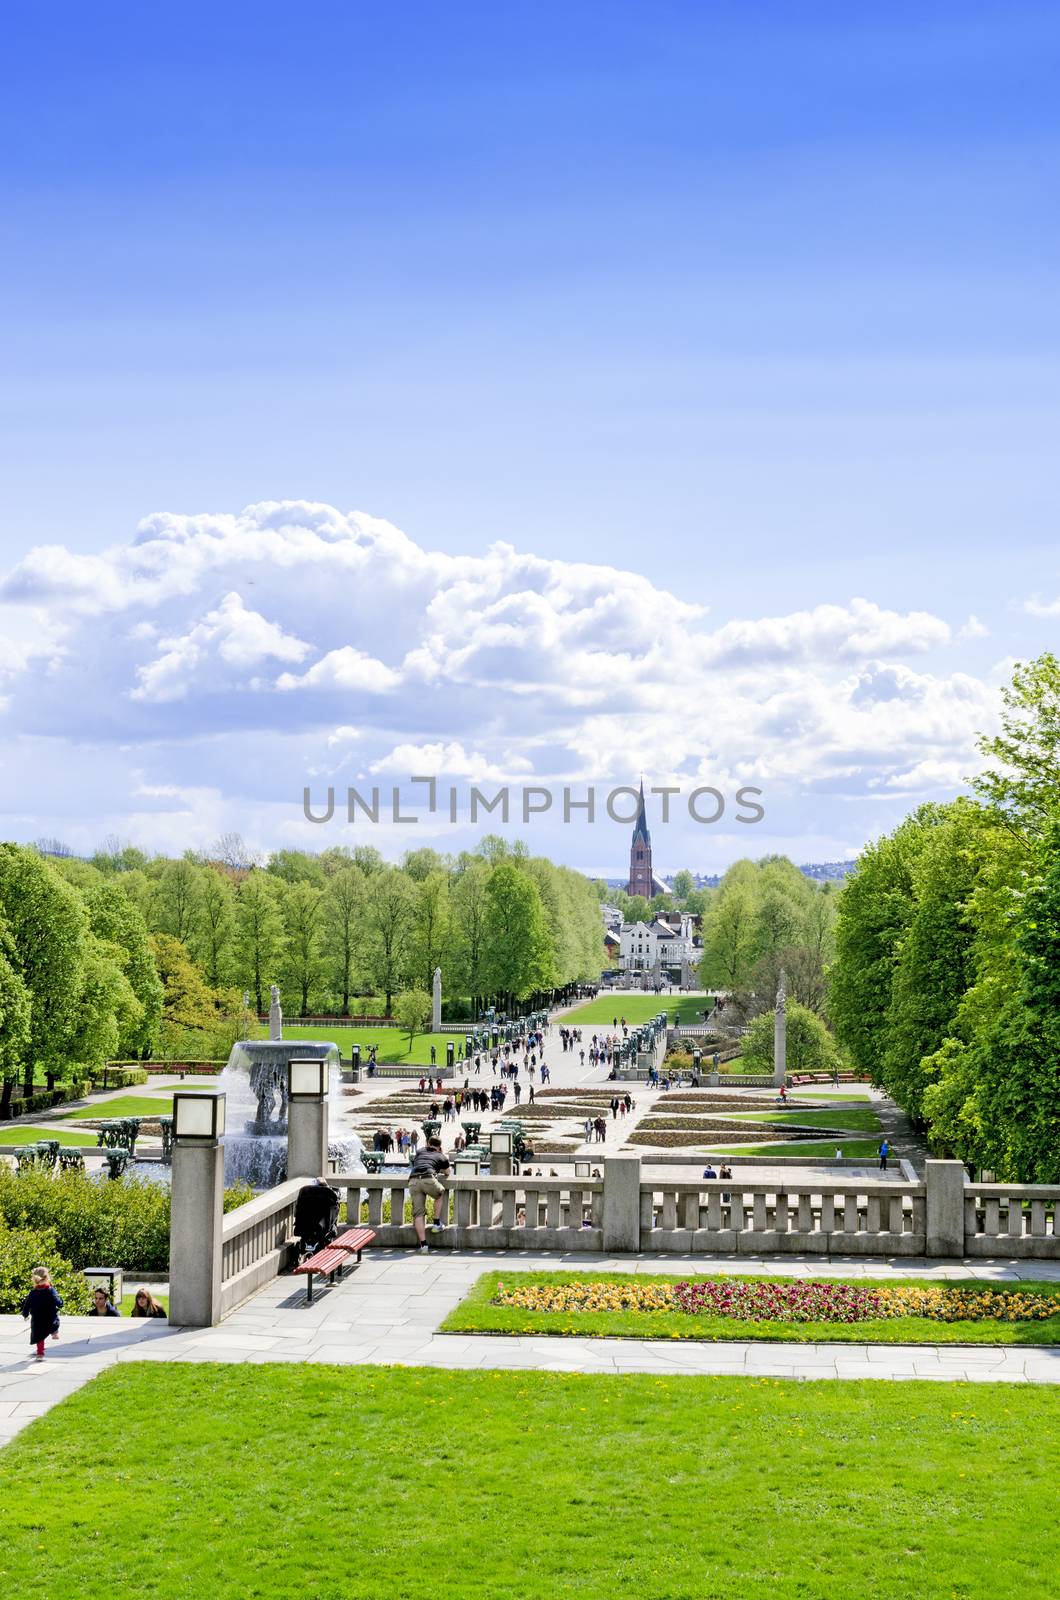 Statues in Vigeland park in Oslo vertical by Nanisimova